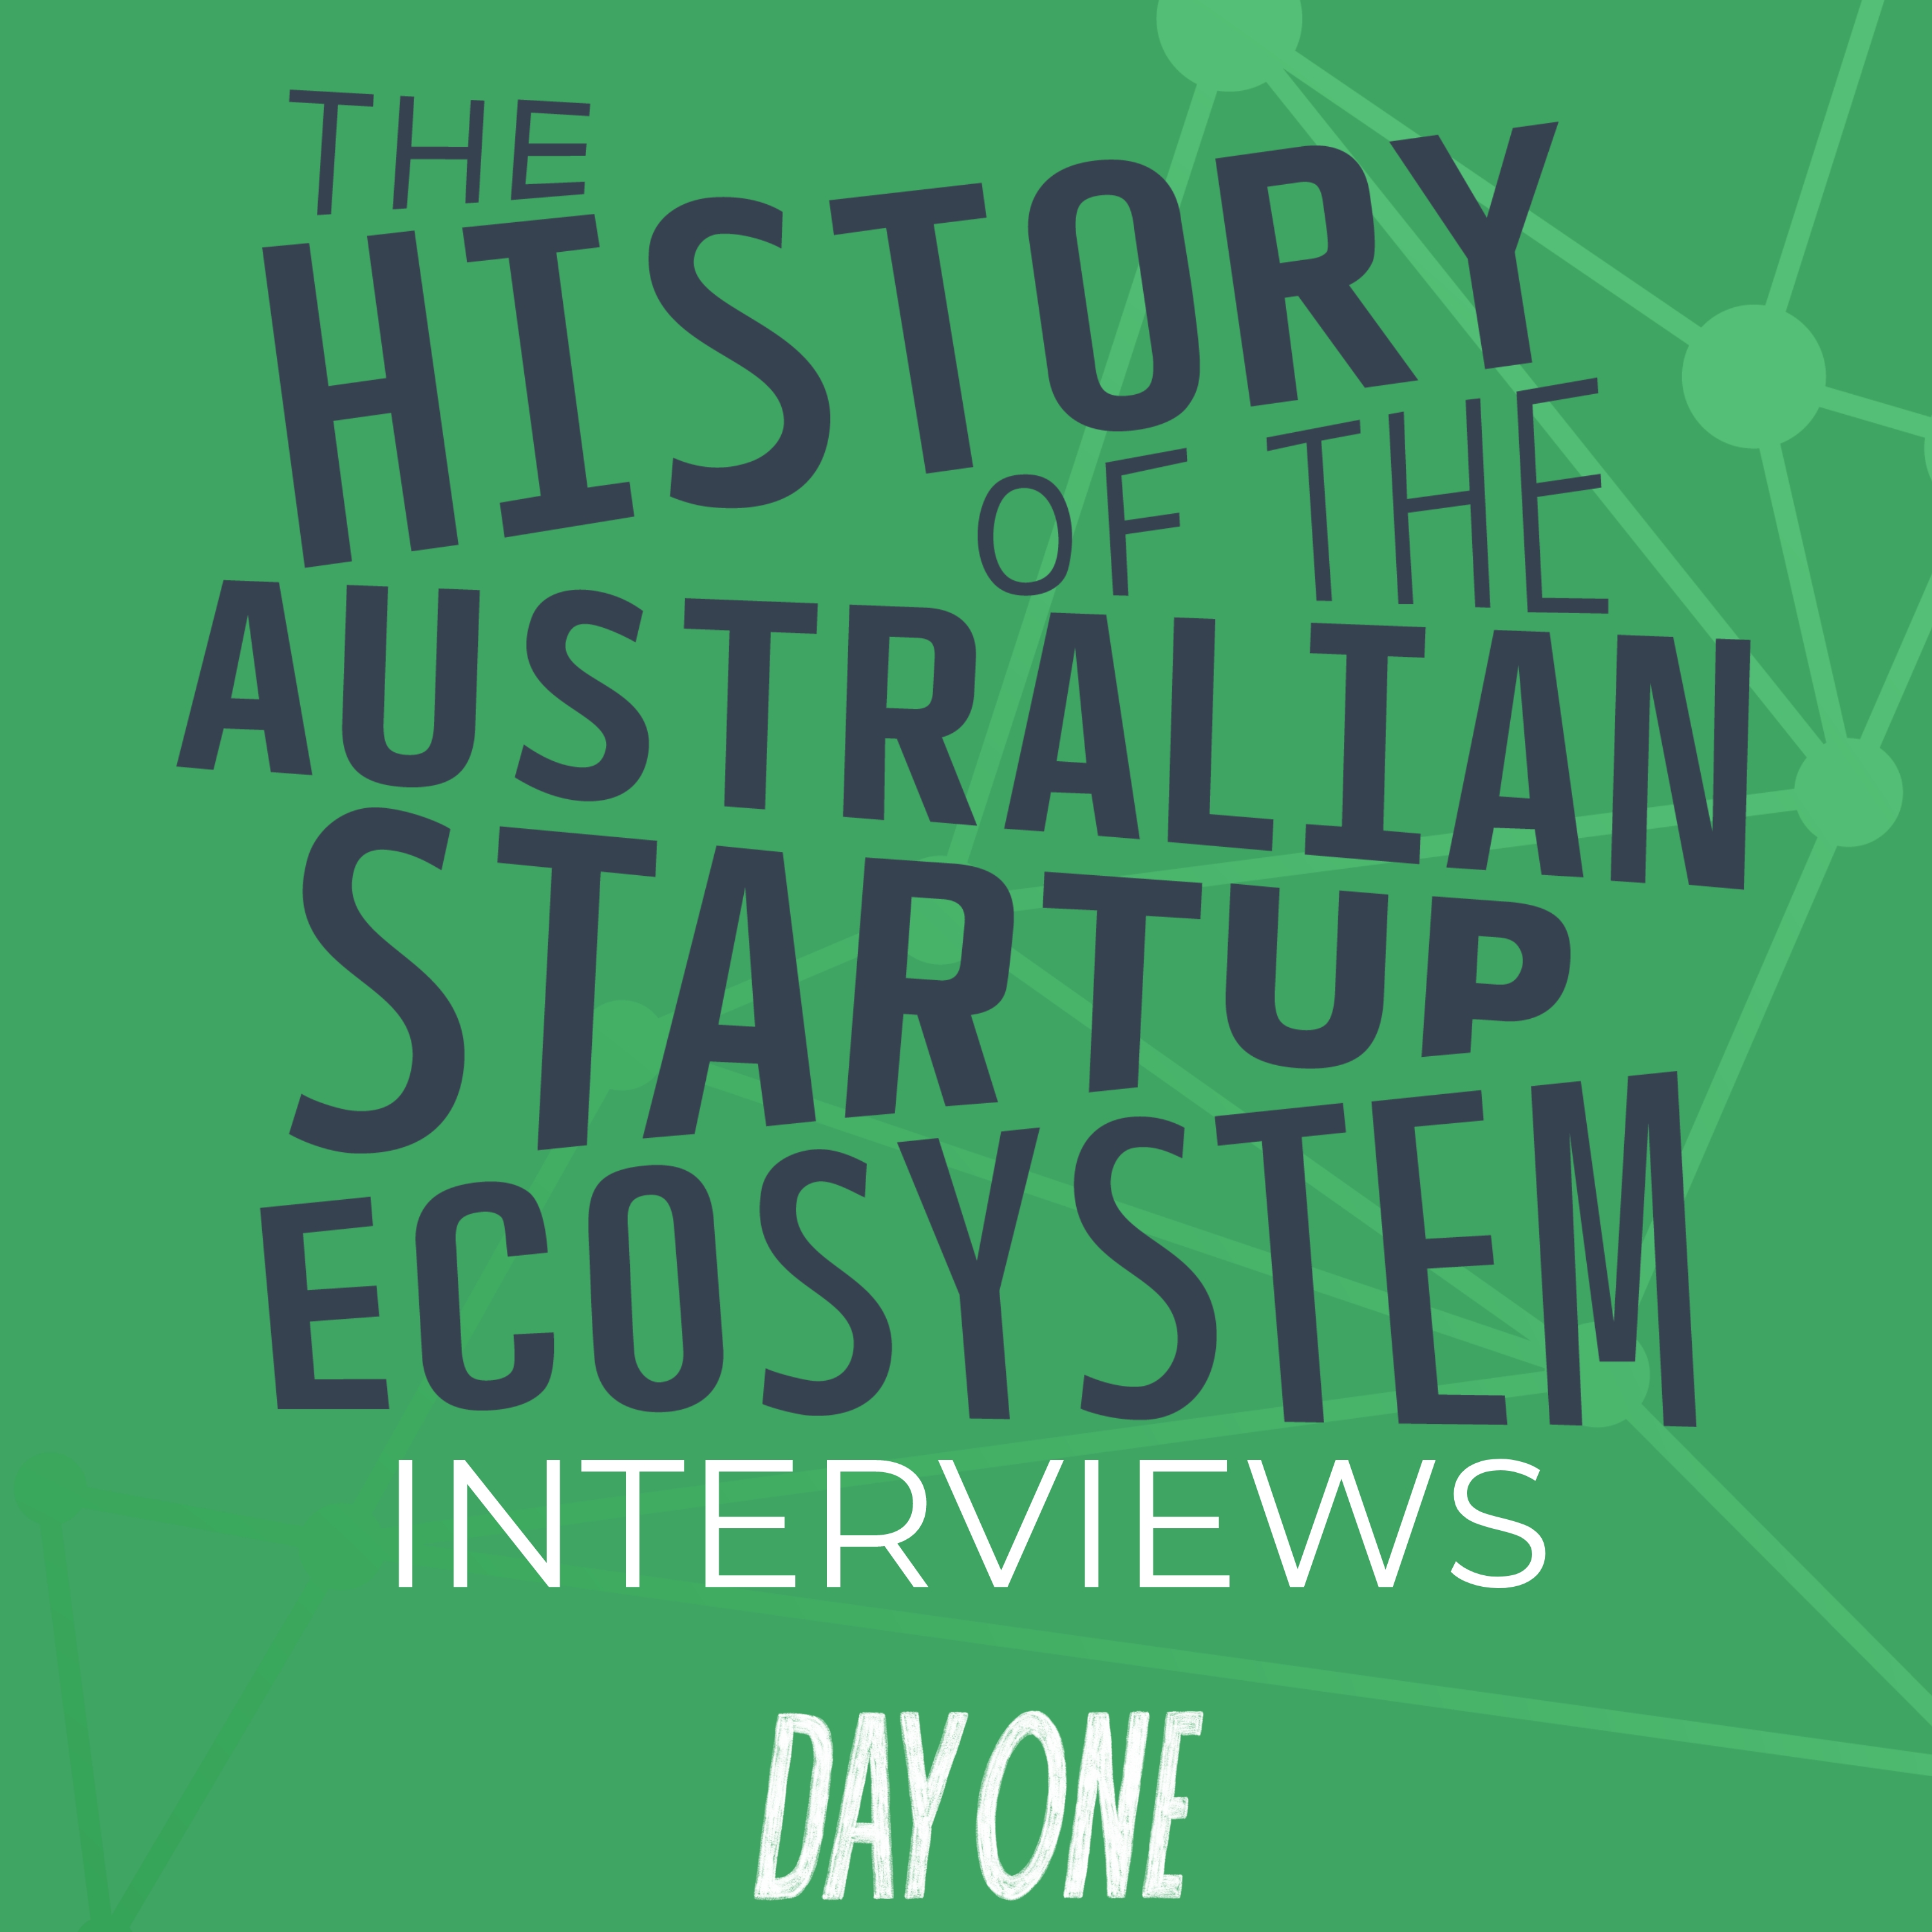 Phil Ireland discusses how he sees mission-driven companies as fitting into Australia’s startup ecosystem